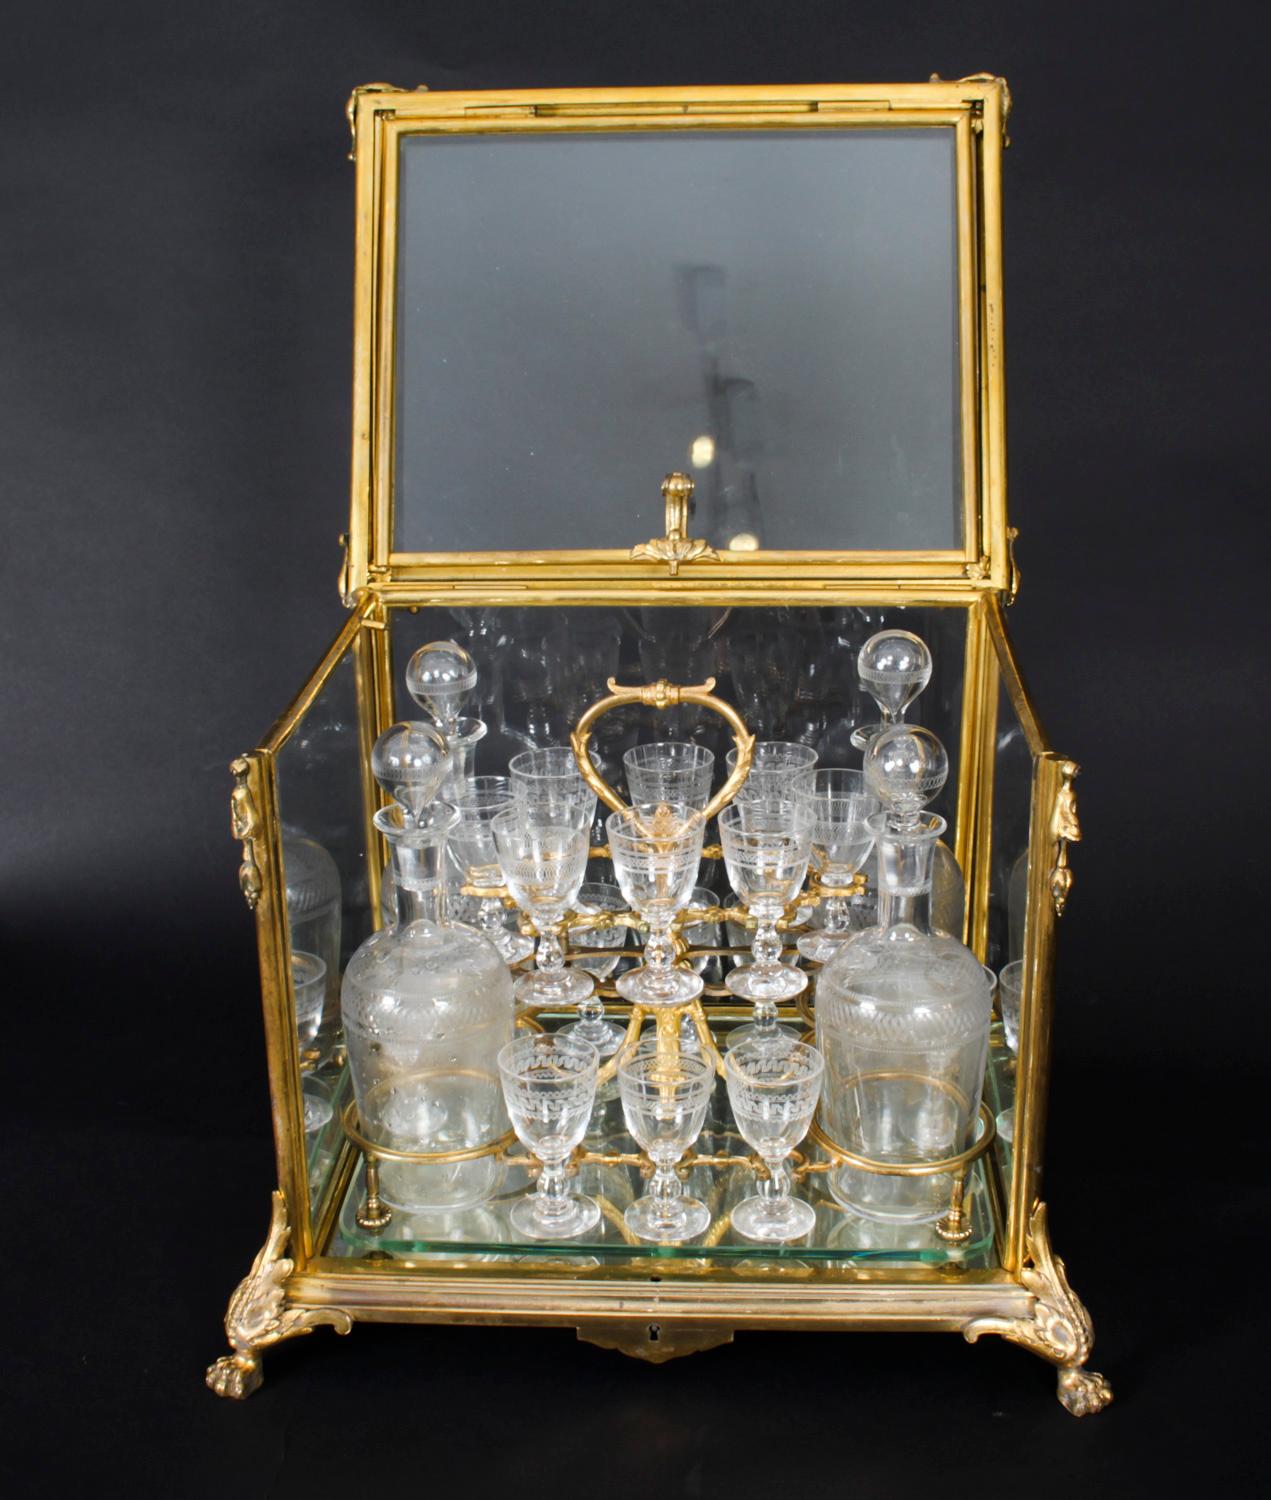 This is an exquisite antique French Napoleon III Bacarrat ormolu and glass Cave a Liqueur, or tantalus, circa 1860 in date. 

The Cave a Liqueur features an ormolu case with glass panels and an 'up and over' lid enclosing a gilt bronze frame